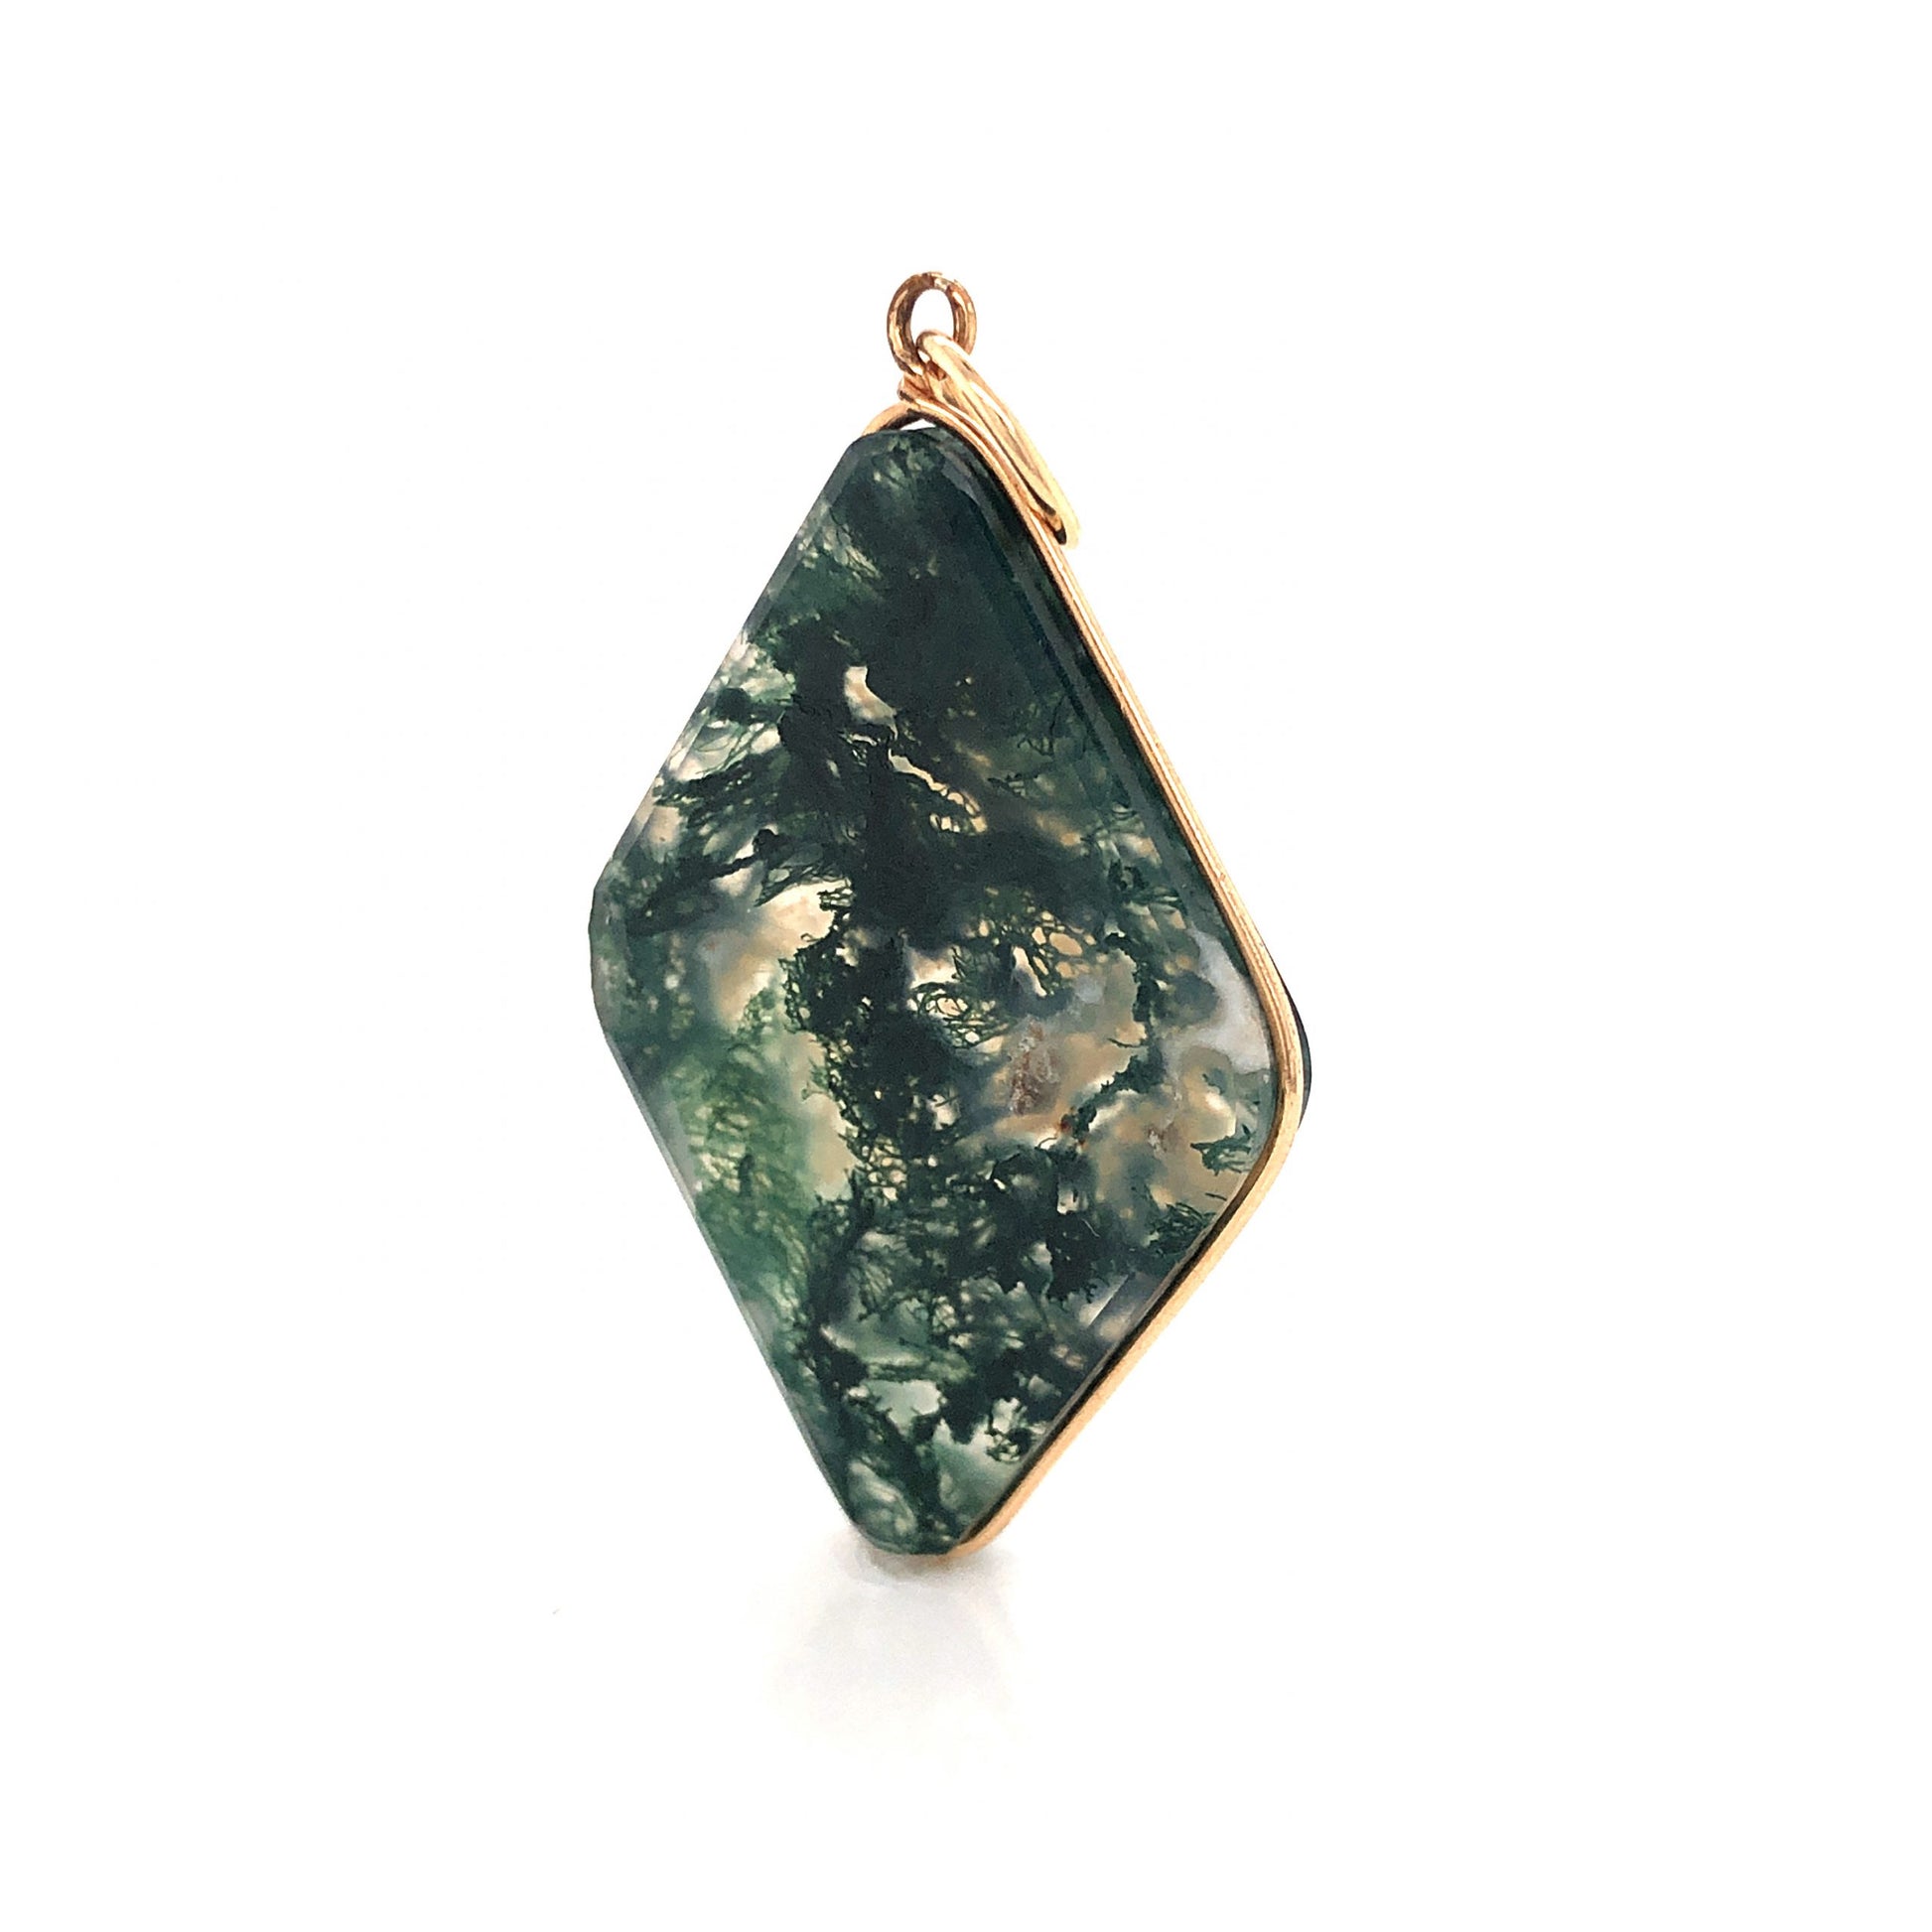 Moss Agate Pendant in 14k Yellow GoldComposition: 14 Karat Yellow Gold Total Gram Weight: 6.9 g